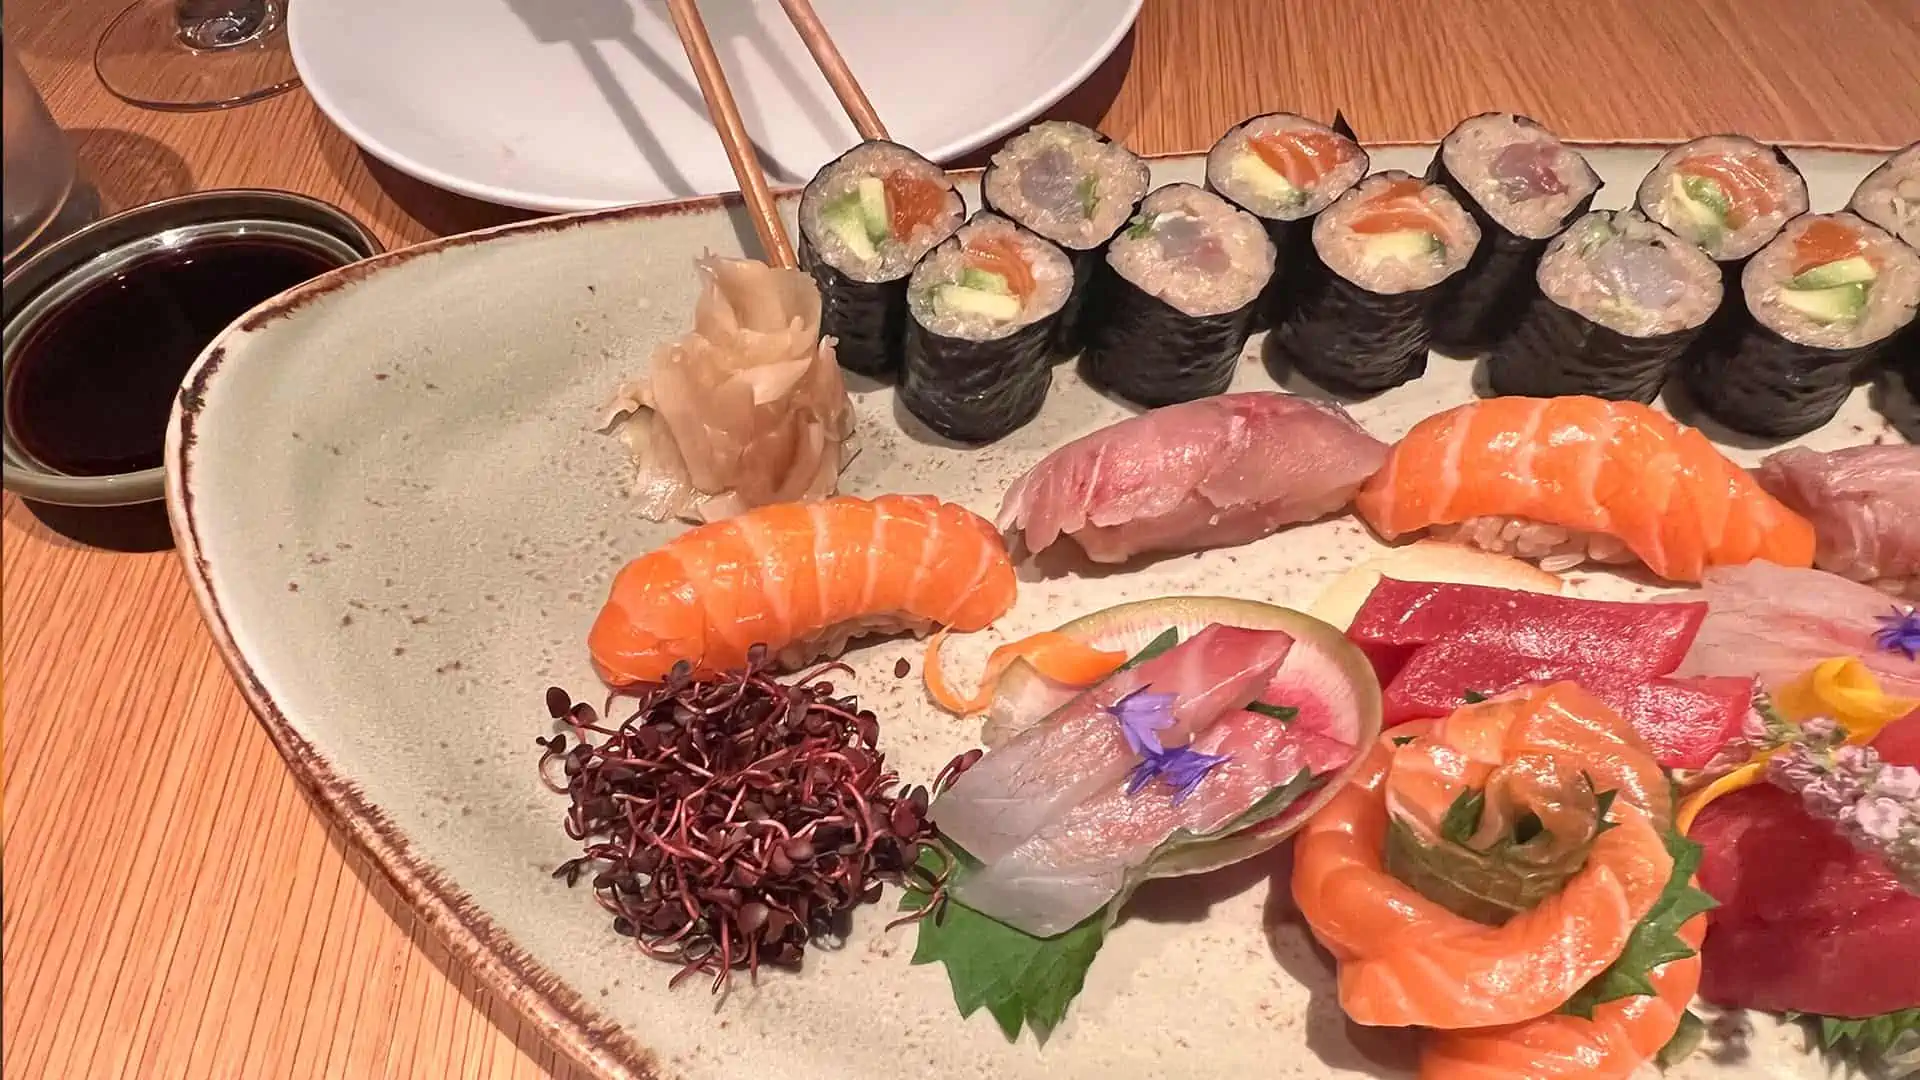 A large plate of a variety of sushi and sashimi at upscale Japanese eatery Bisushima in London